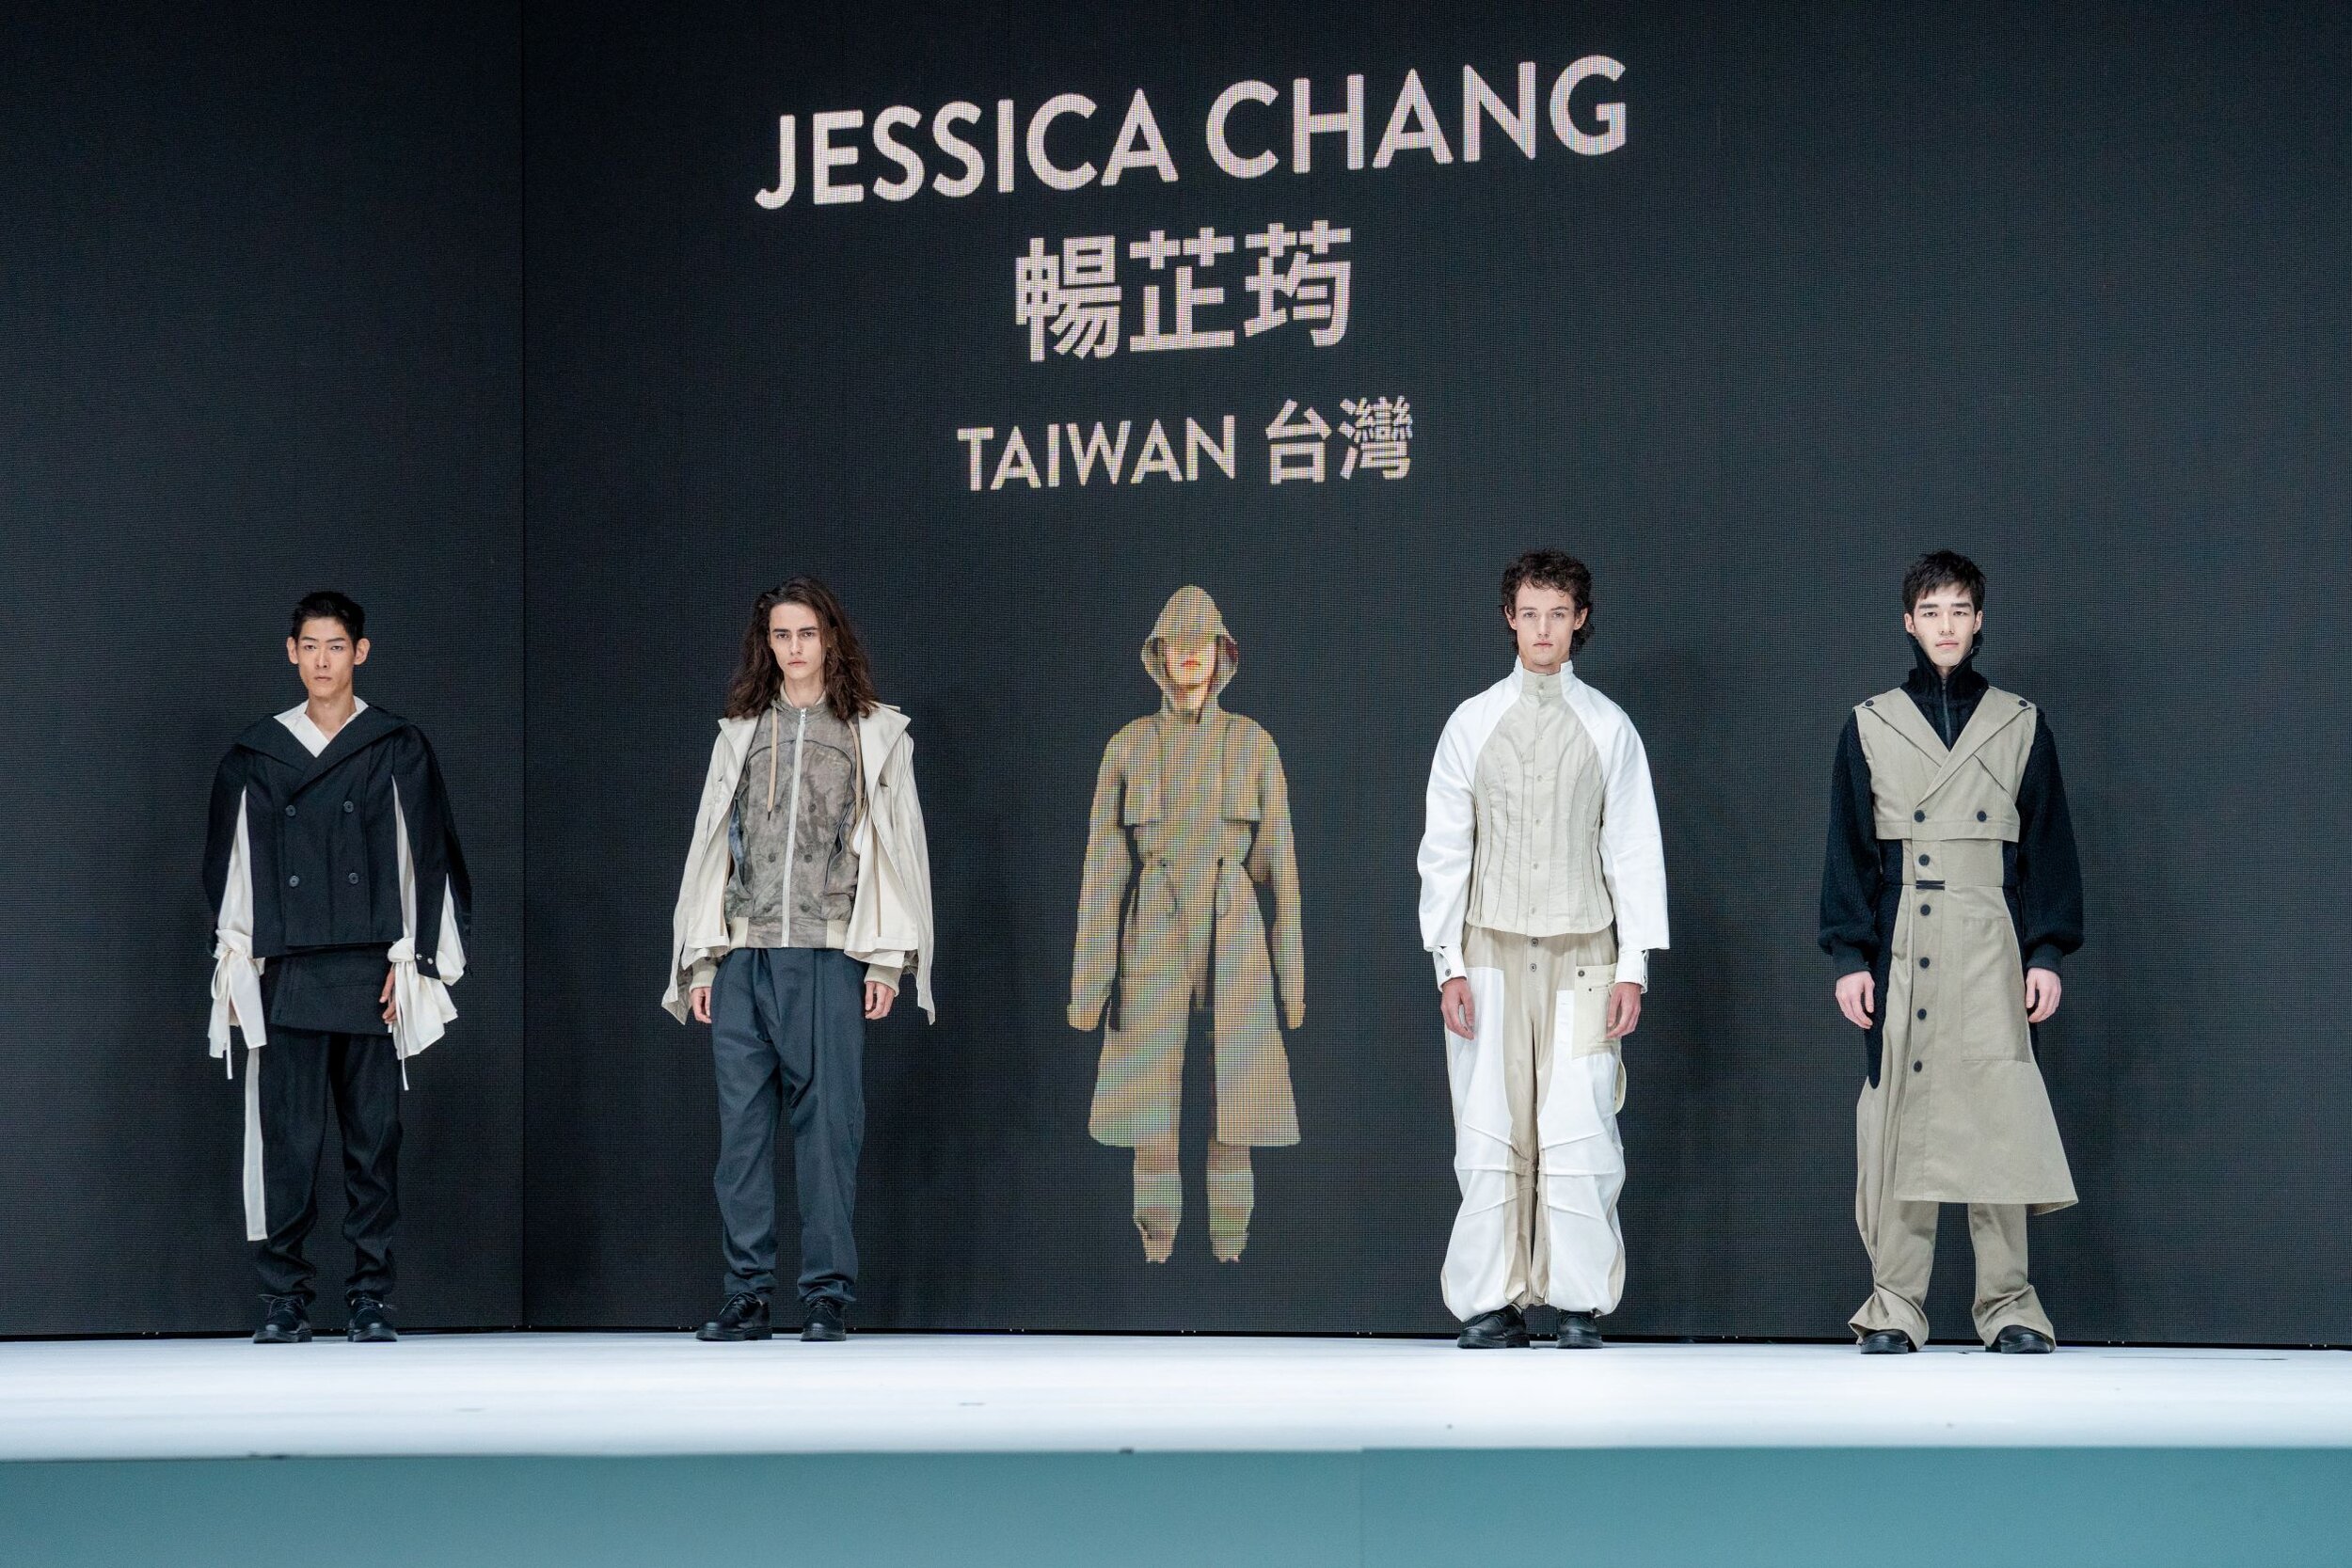  Jessica Chang’s Redress Design Award competition collection, "The Wall". 